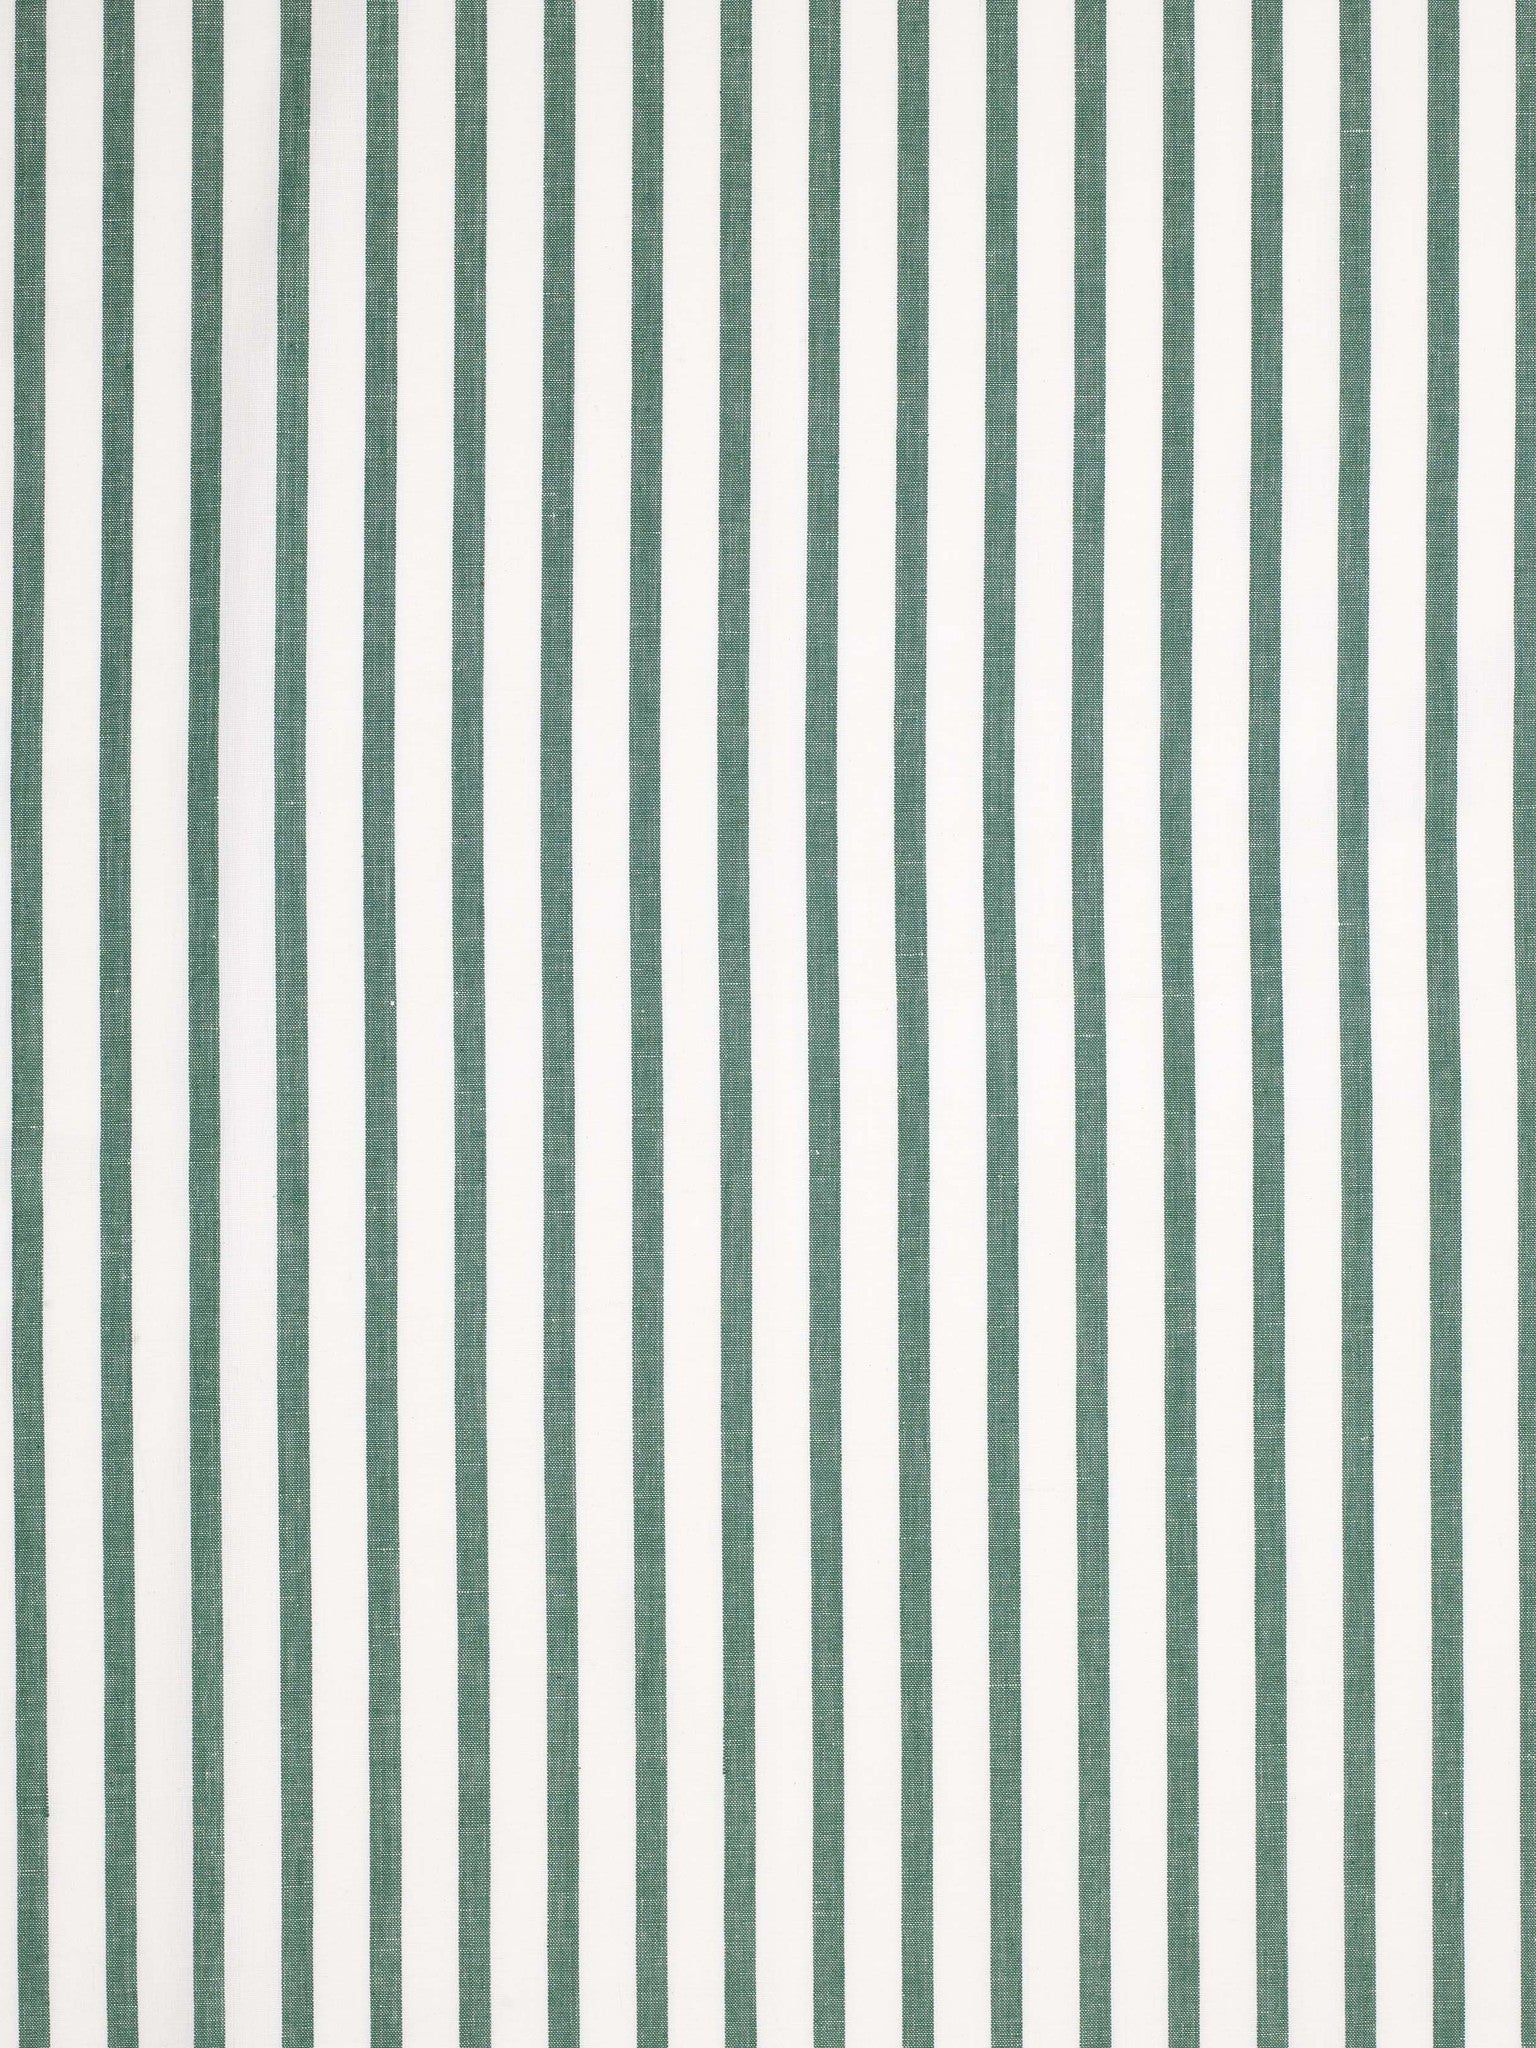 Grey Striped French Ticking Striped Cotton Linen Blend Fabric Premium  Quality 141cm (55) Width - per Meter